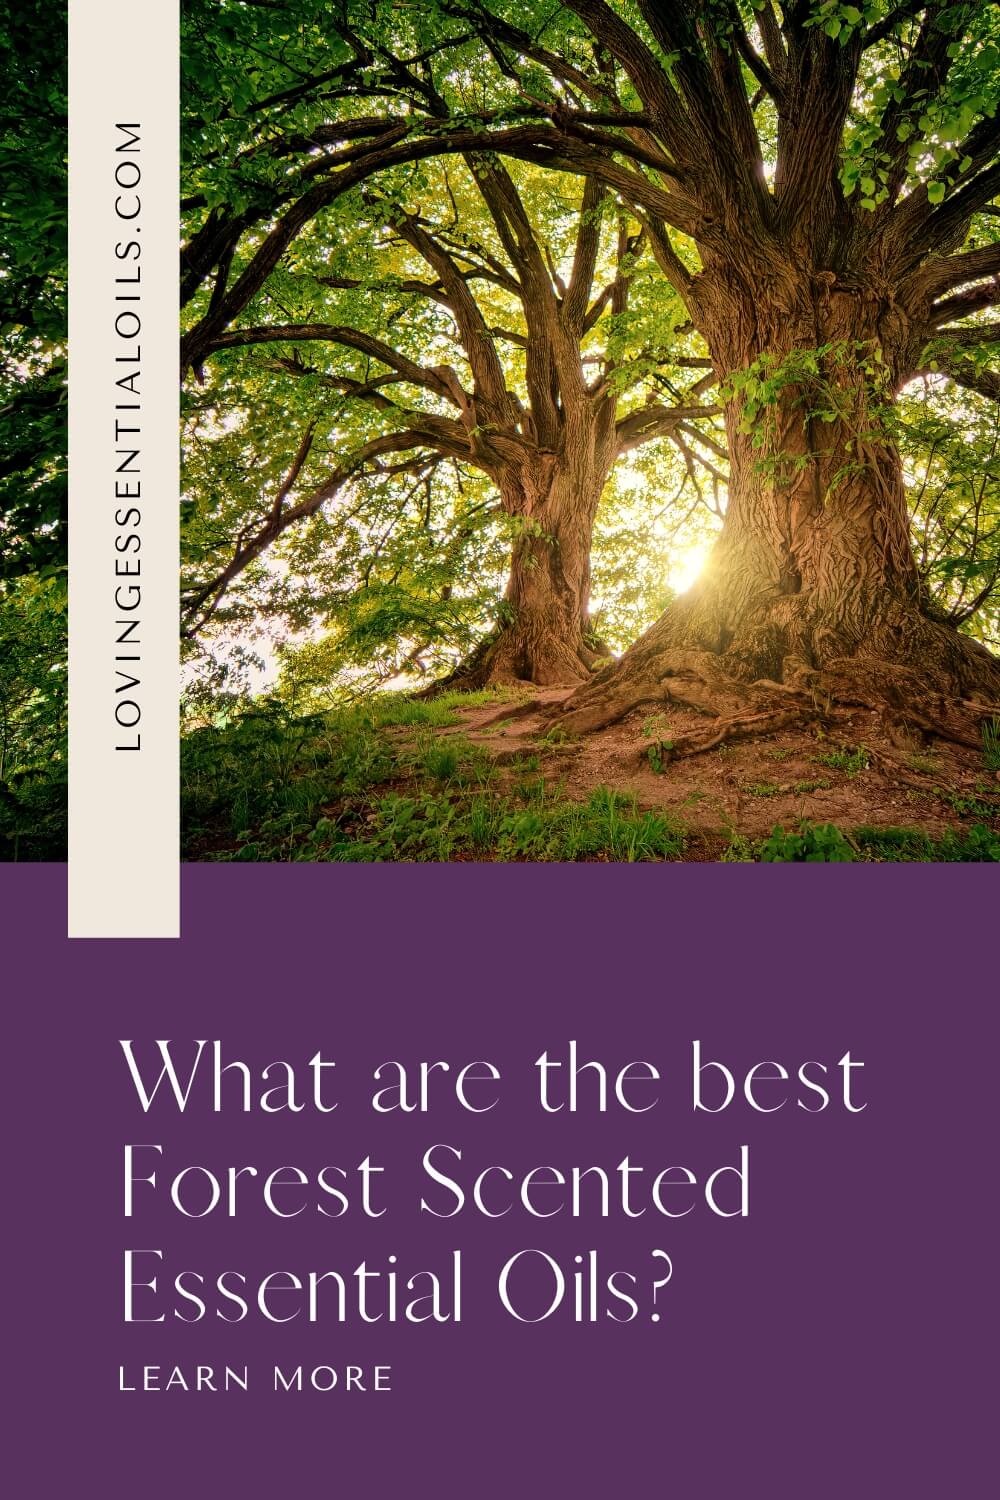 What are the best Forest Scented Essential Oils? by Loving Essential Oils